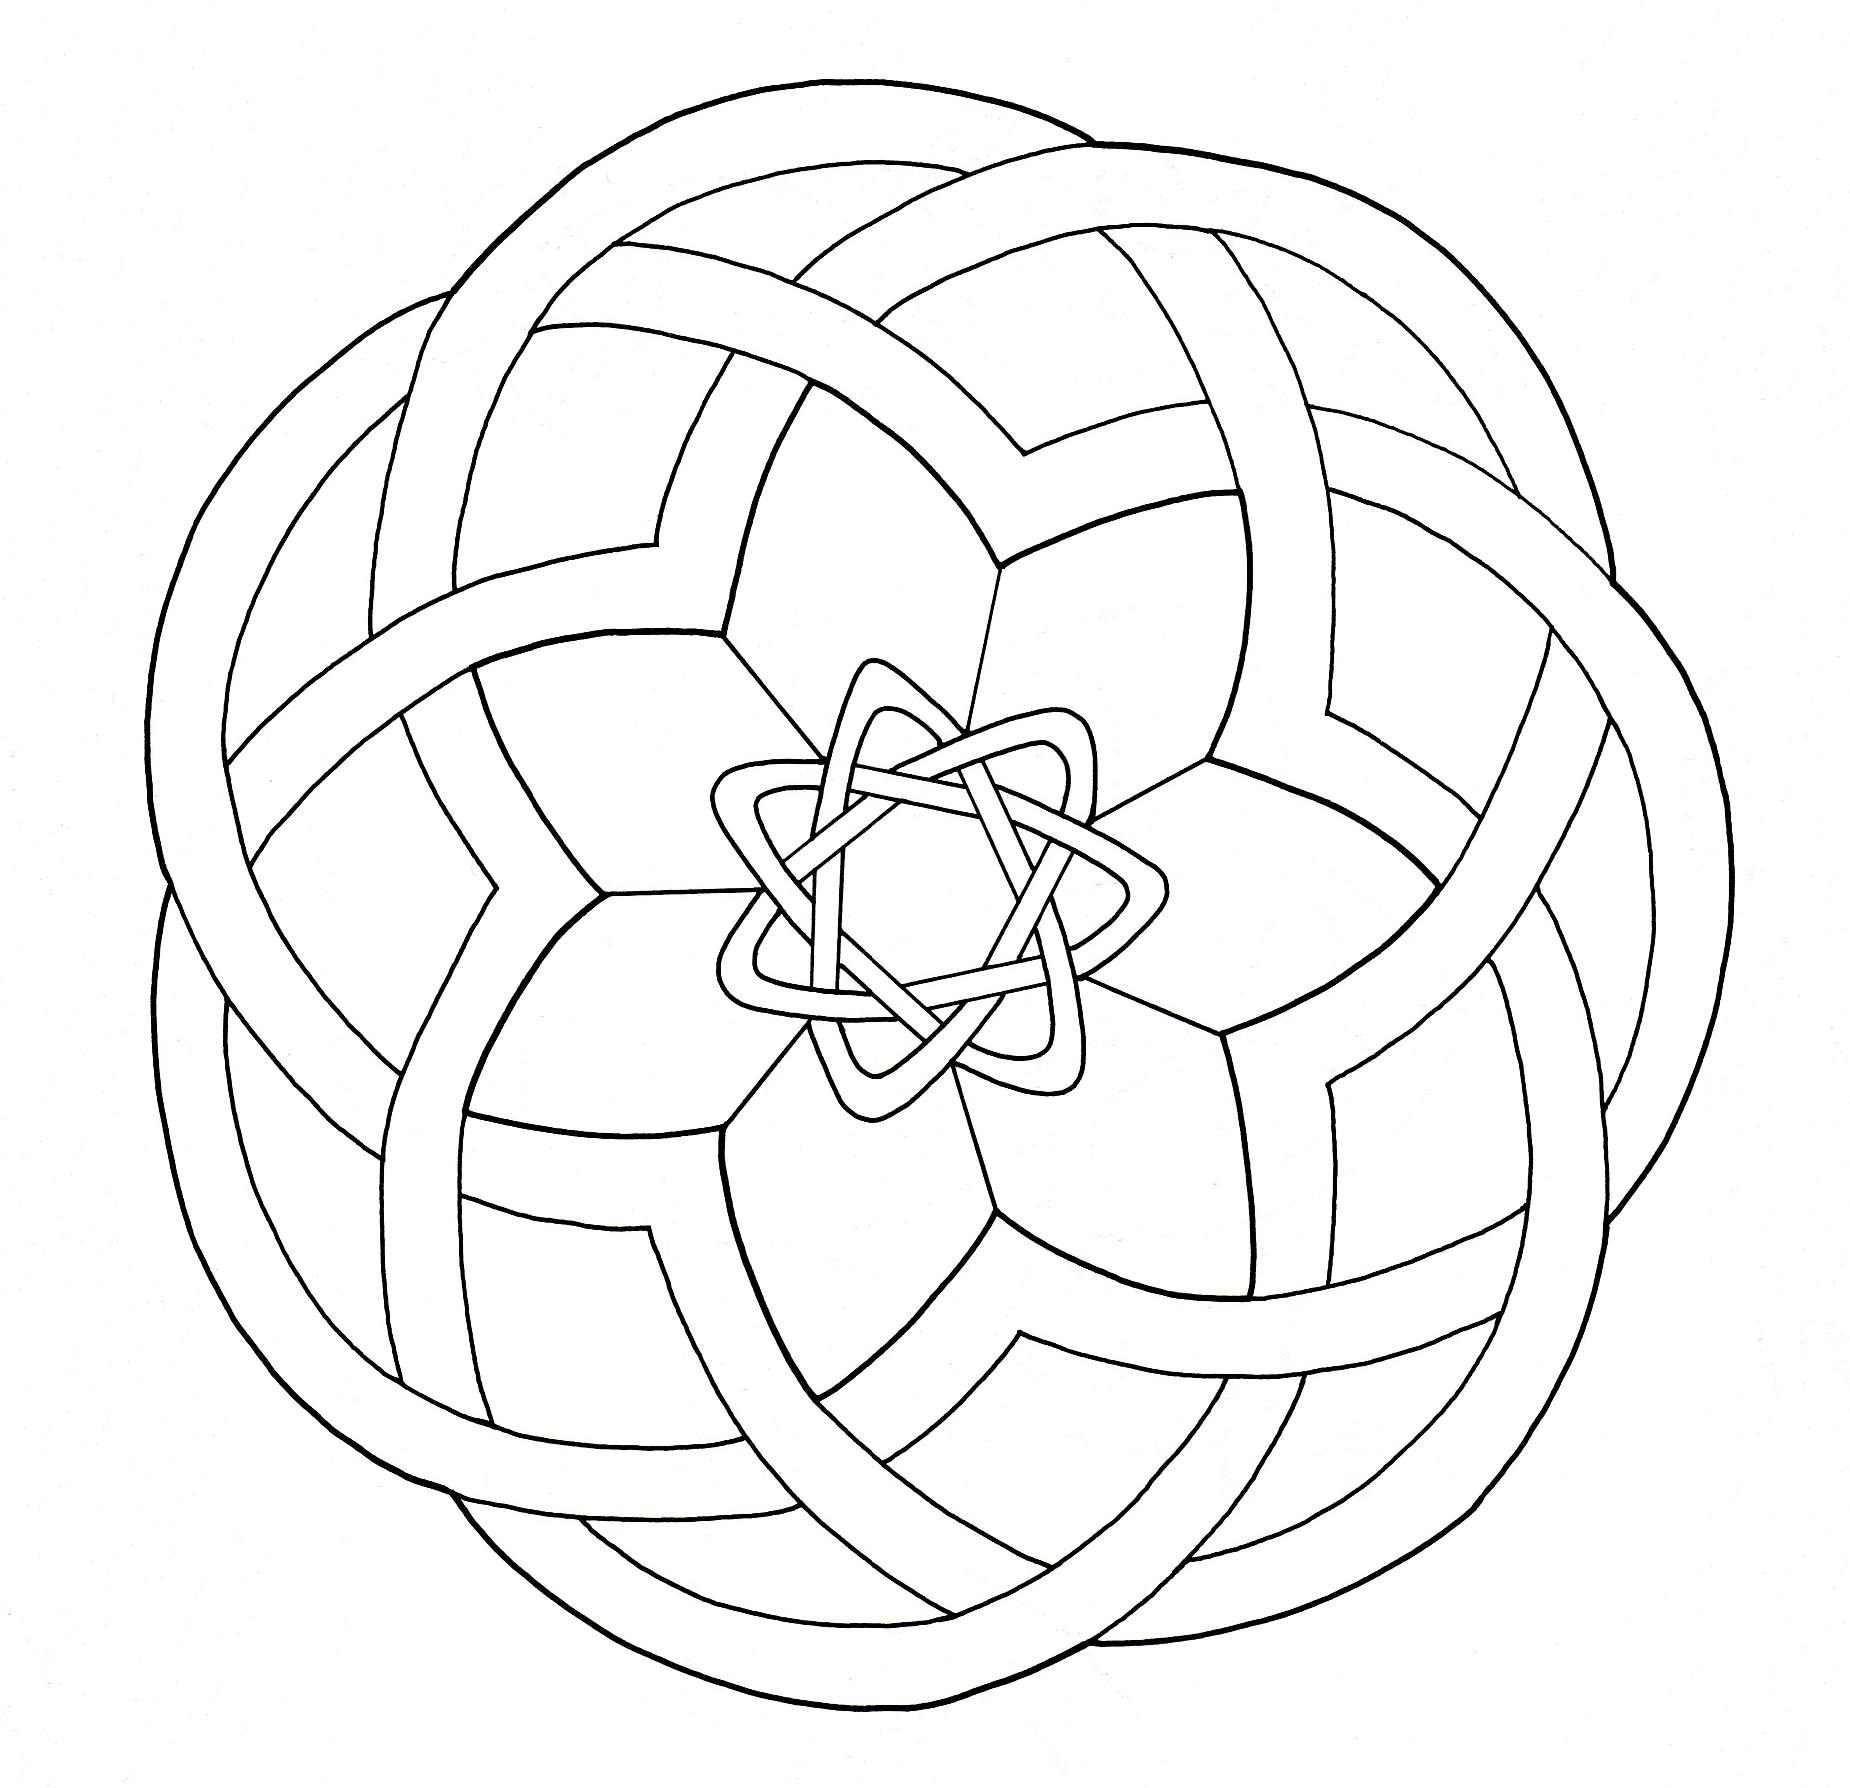 If you are looking for a Mandala not too complicated to color, but still with a relative difficulty level, this one is perfect for you. Do whatever it takes to get rid of any distractions that may interfere with your coloring.